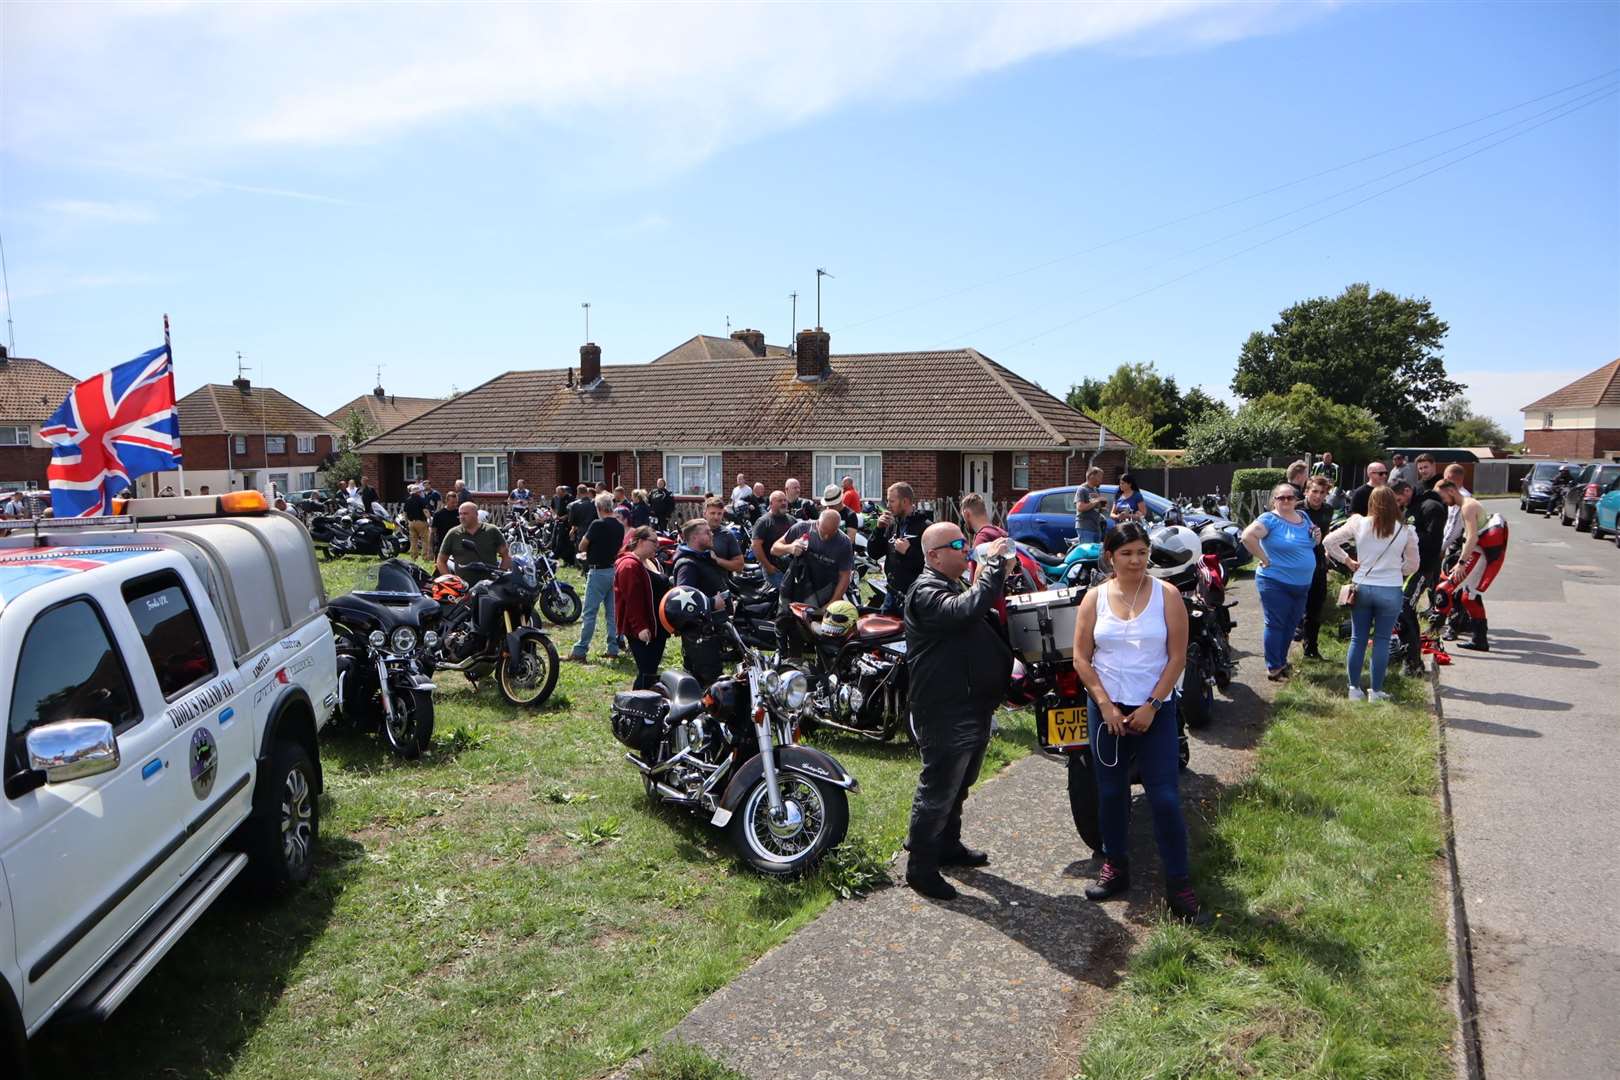 The streets thronged with bikers. Picture: John Nurden